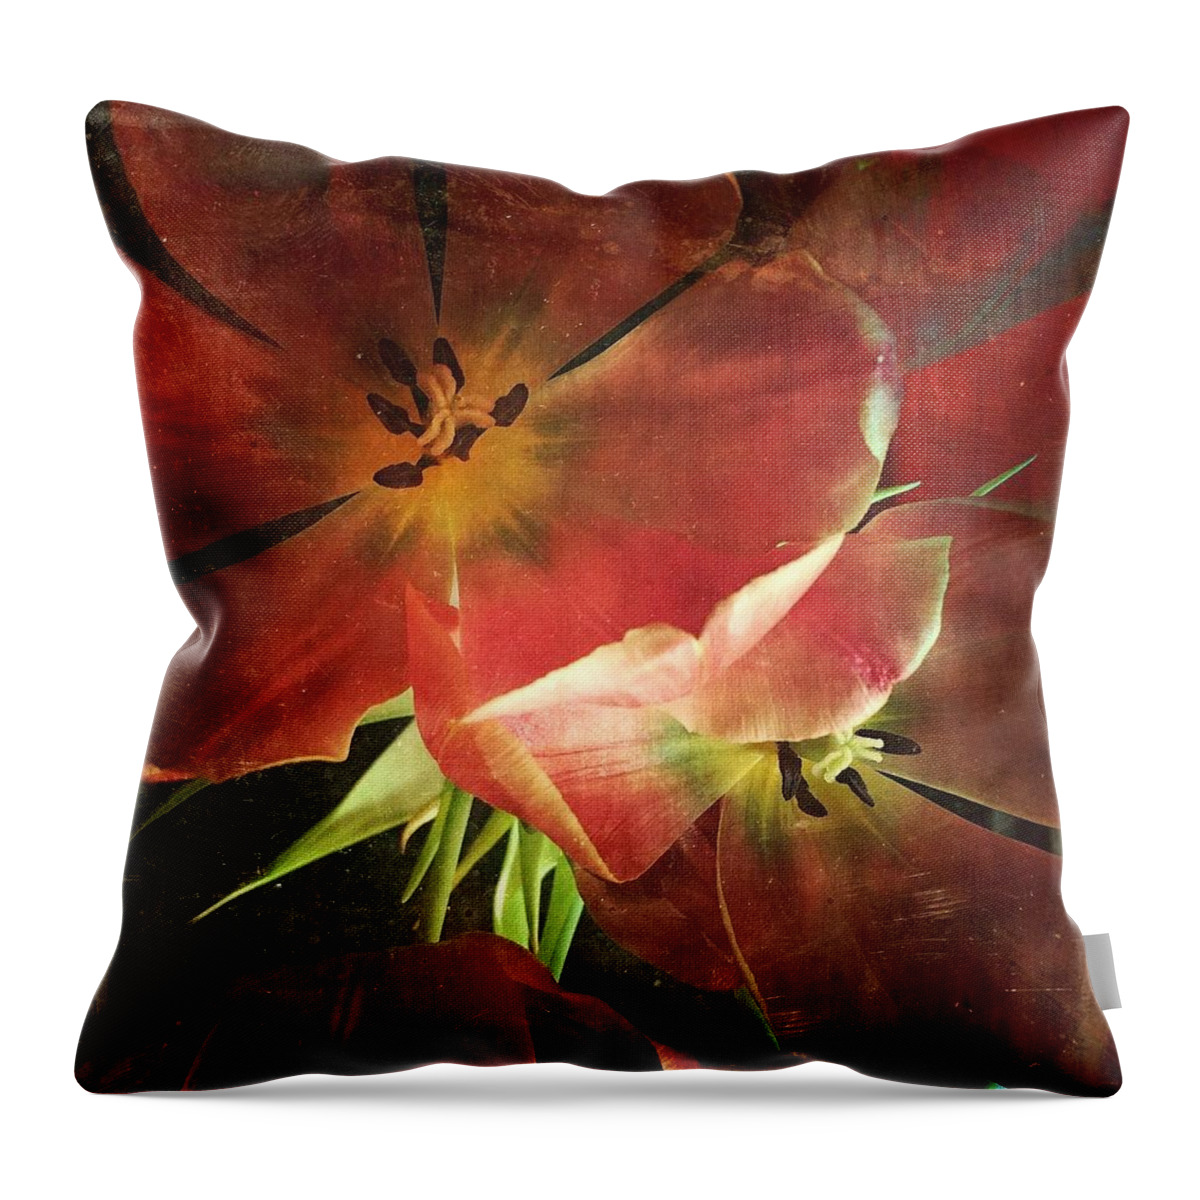 Tulips Throw Pillow featuring the photograph Becoming by Jennifer Preston